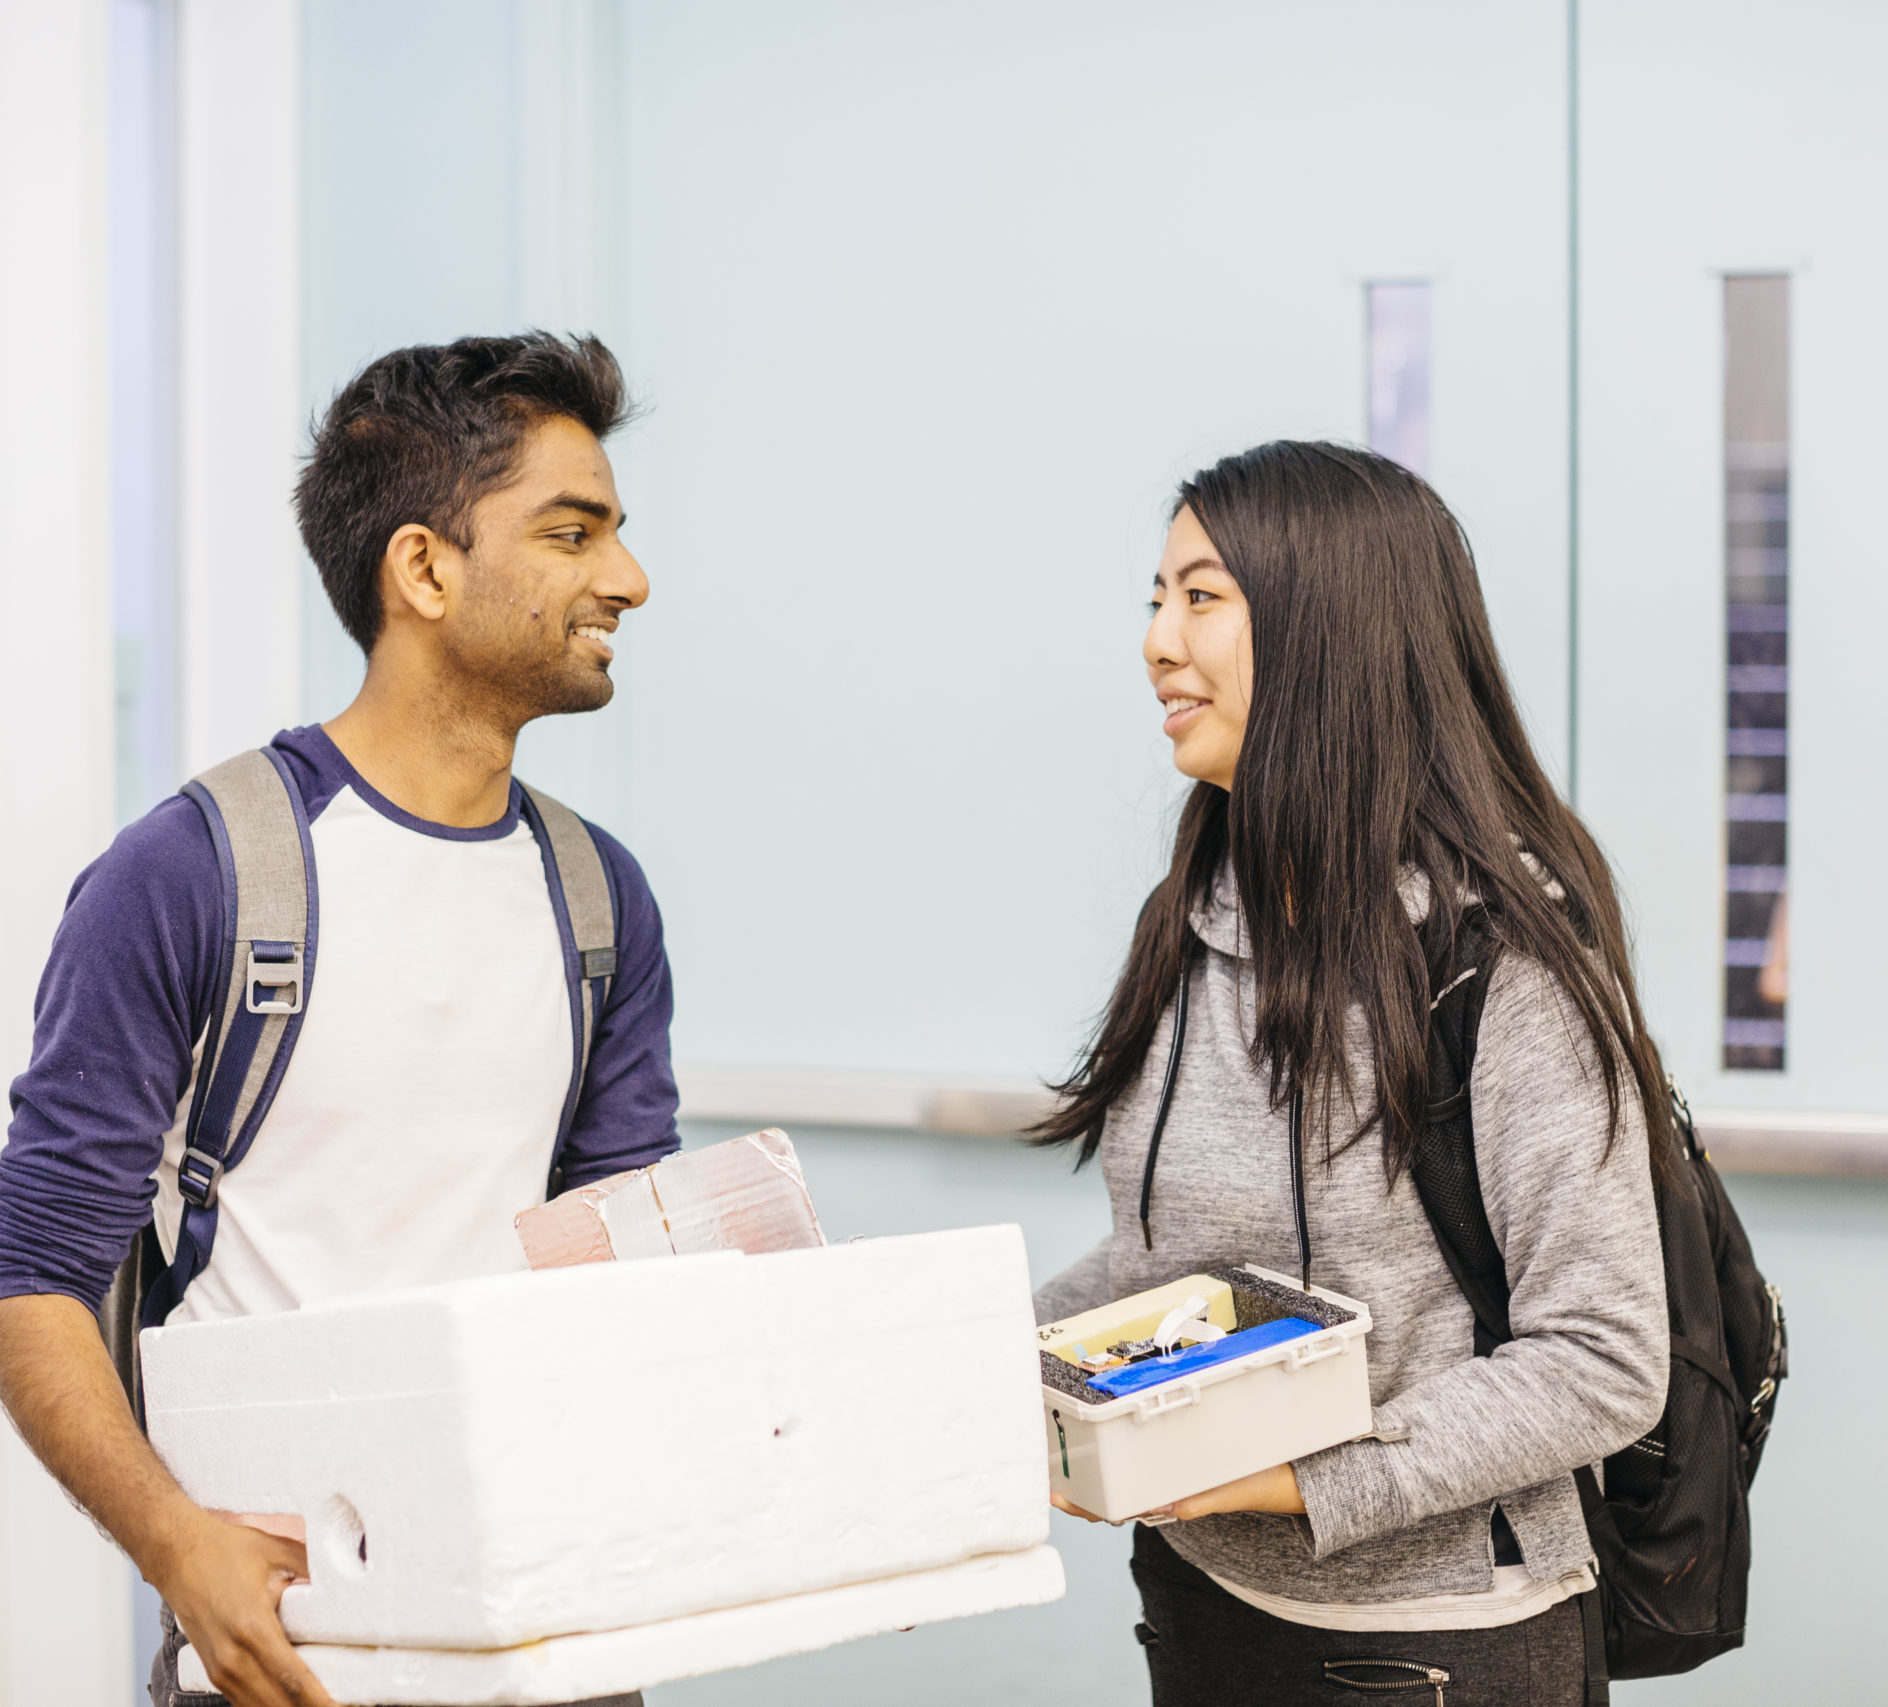 two students standing and talking; one is holding a box